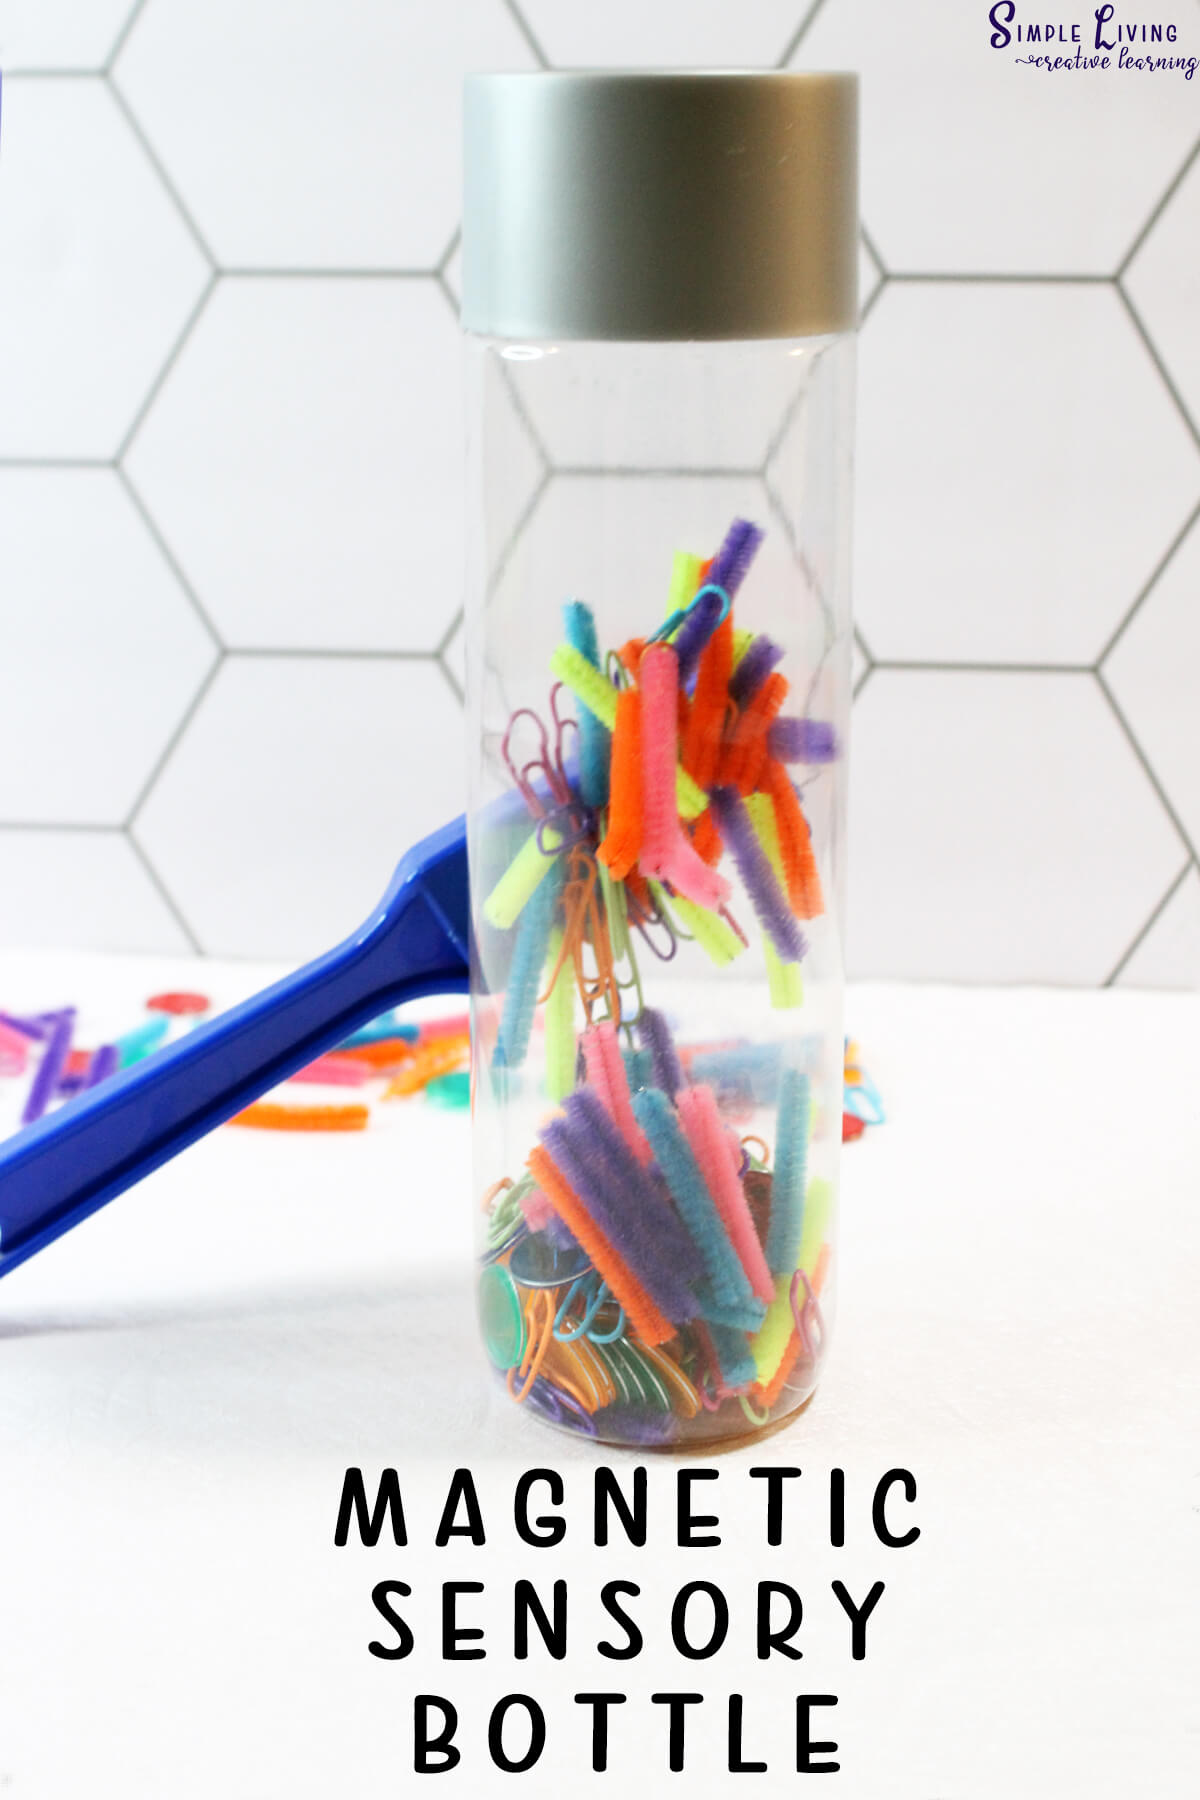 How to Make a Magnetic Sensory Bottle